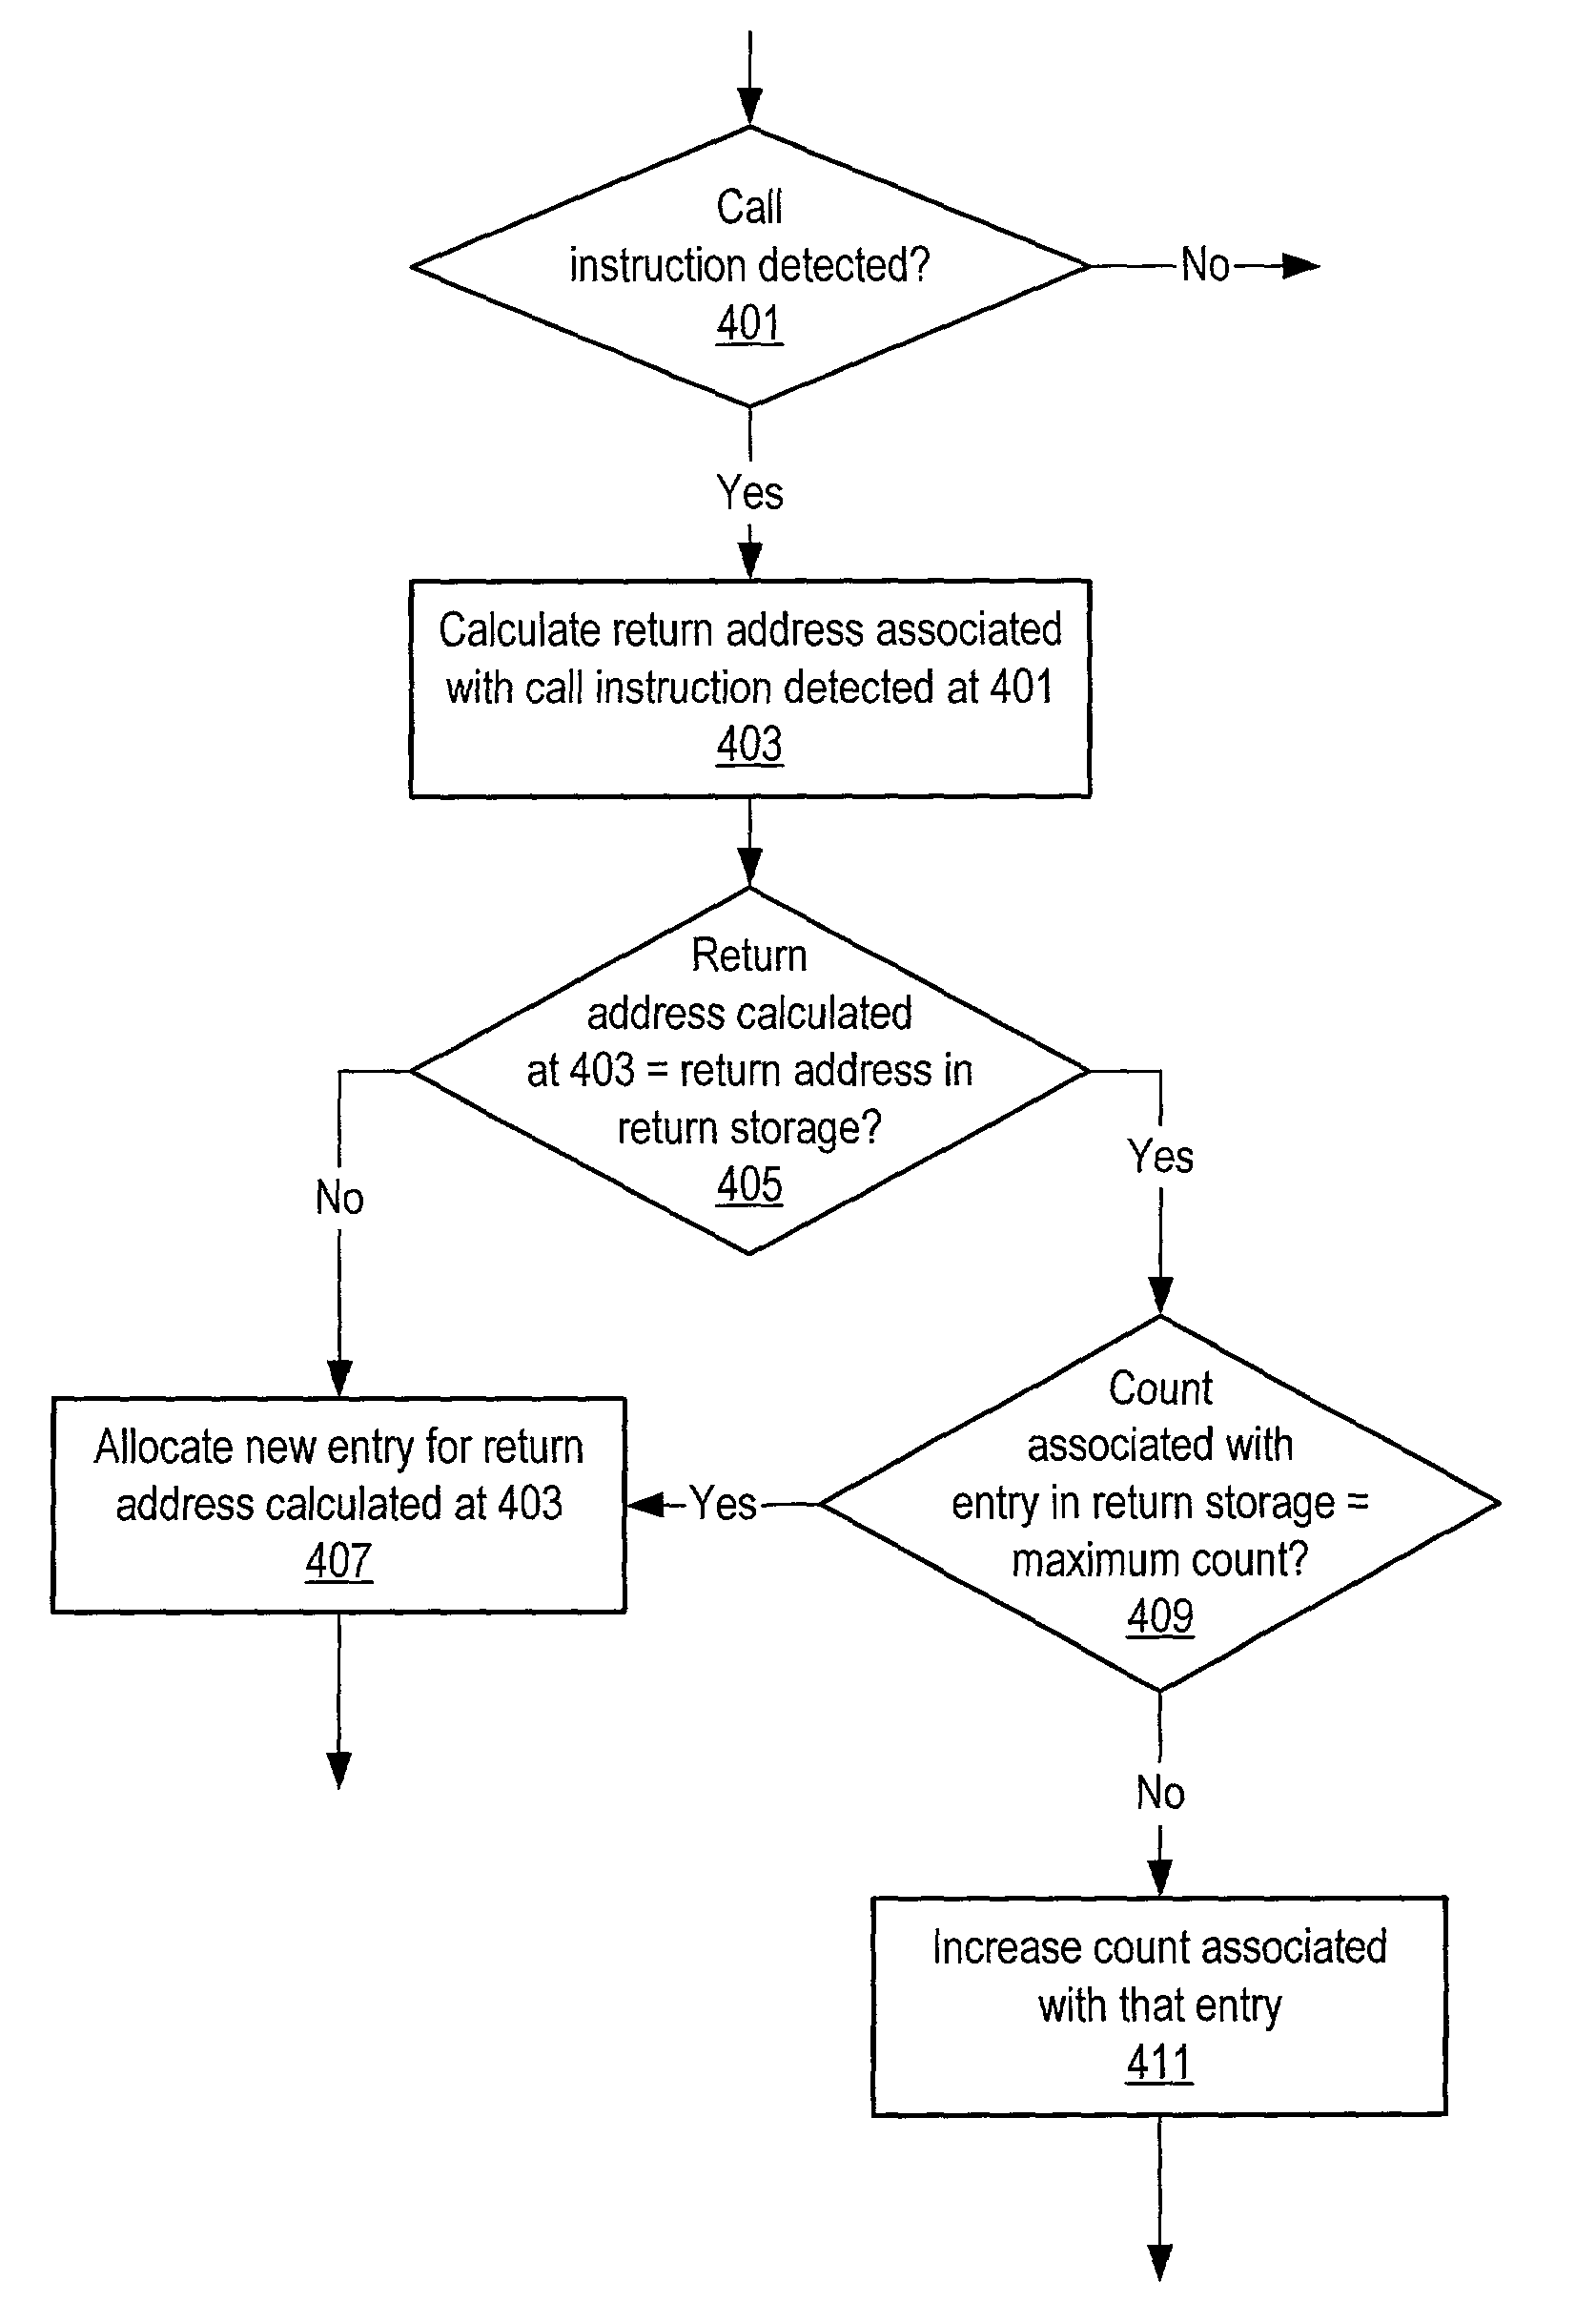 Microprocessor including return prediction unit configured to determine whether a stored return address corresponds to more than one call instruction